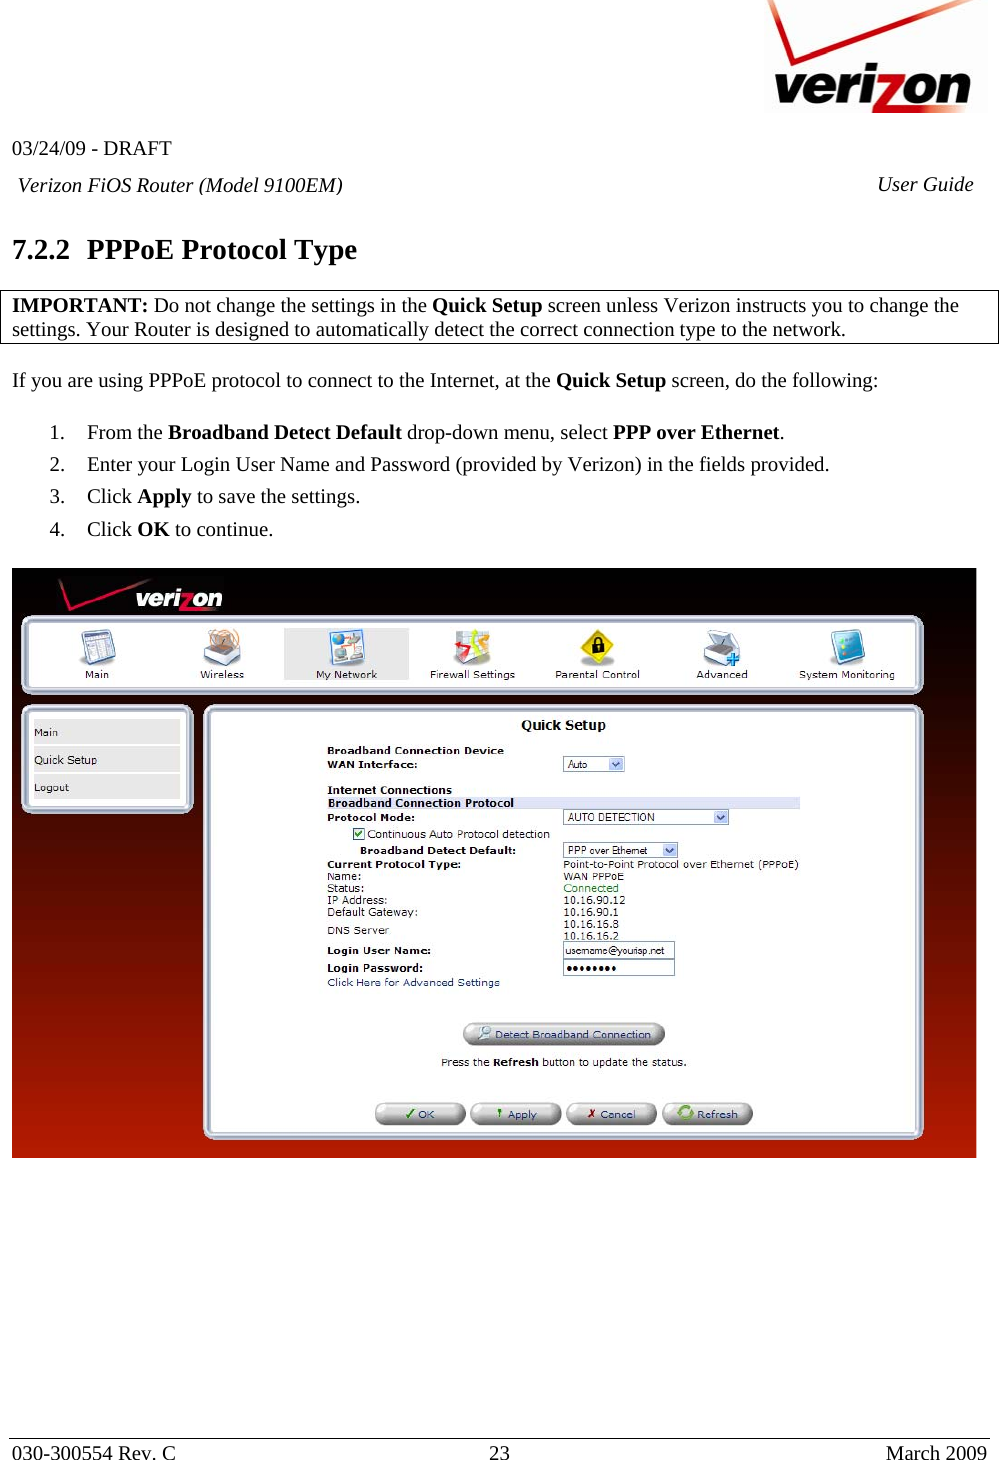   03/24/09 - DRAFT   030-300554 Rev. C  23      March 2009  Verizon FiOS Router (Model 9100EM) User Guide 7.2.2 PPPoE Protocol Type  IMPORTANT: Do not change the settings in the Quick Setup screen unless Verizon instructs you to change the settings. Your Router is designed to automatically detect the correct connection type to the network.    If you are using PPPoE protocol to connect to the Internet, at the Quick Setup screen, do the following:  1. From the Broadband Detect Default drop-down menu, select PPP over Ethernet. 2. Enter your Login User Name and Password (provided by Verizon) in the fields provided. 3. Click Apply to save the settings. 4. Click OK to continue.              